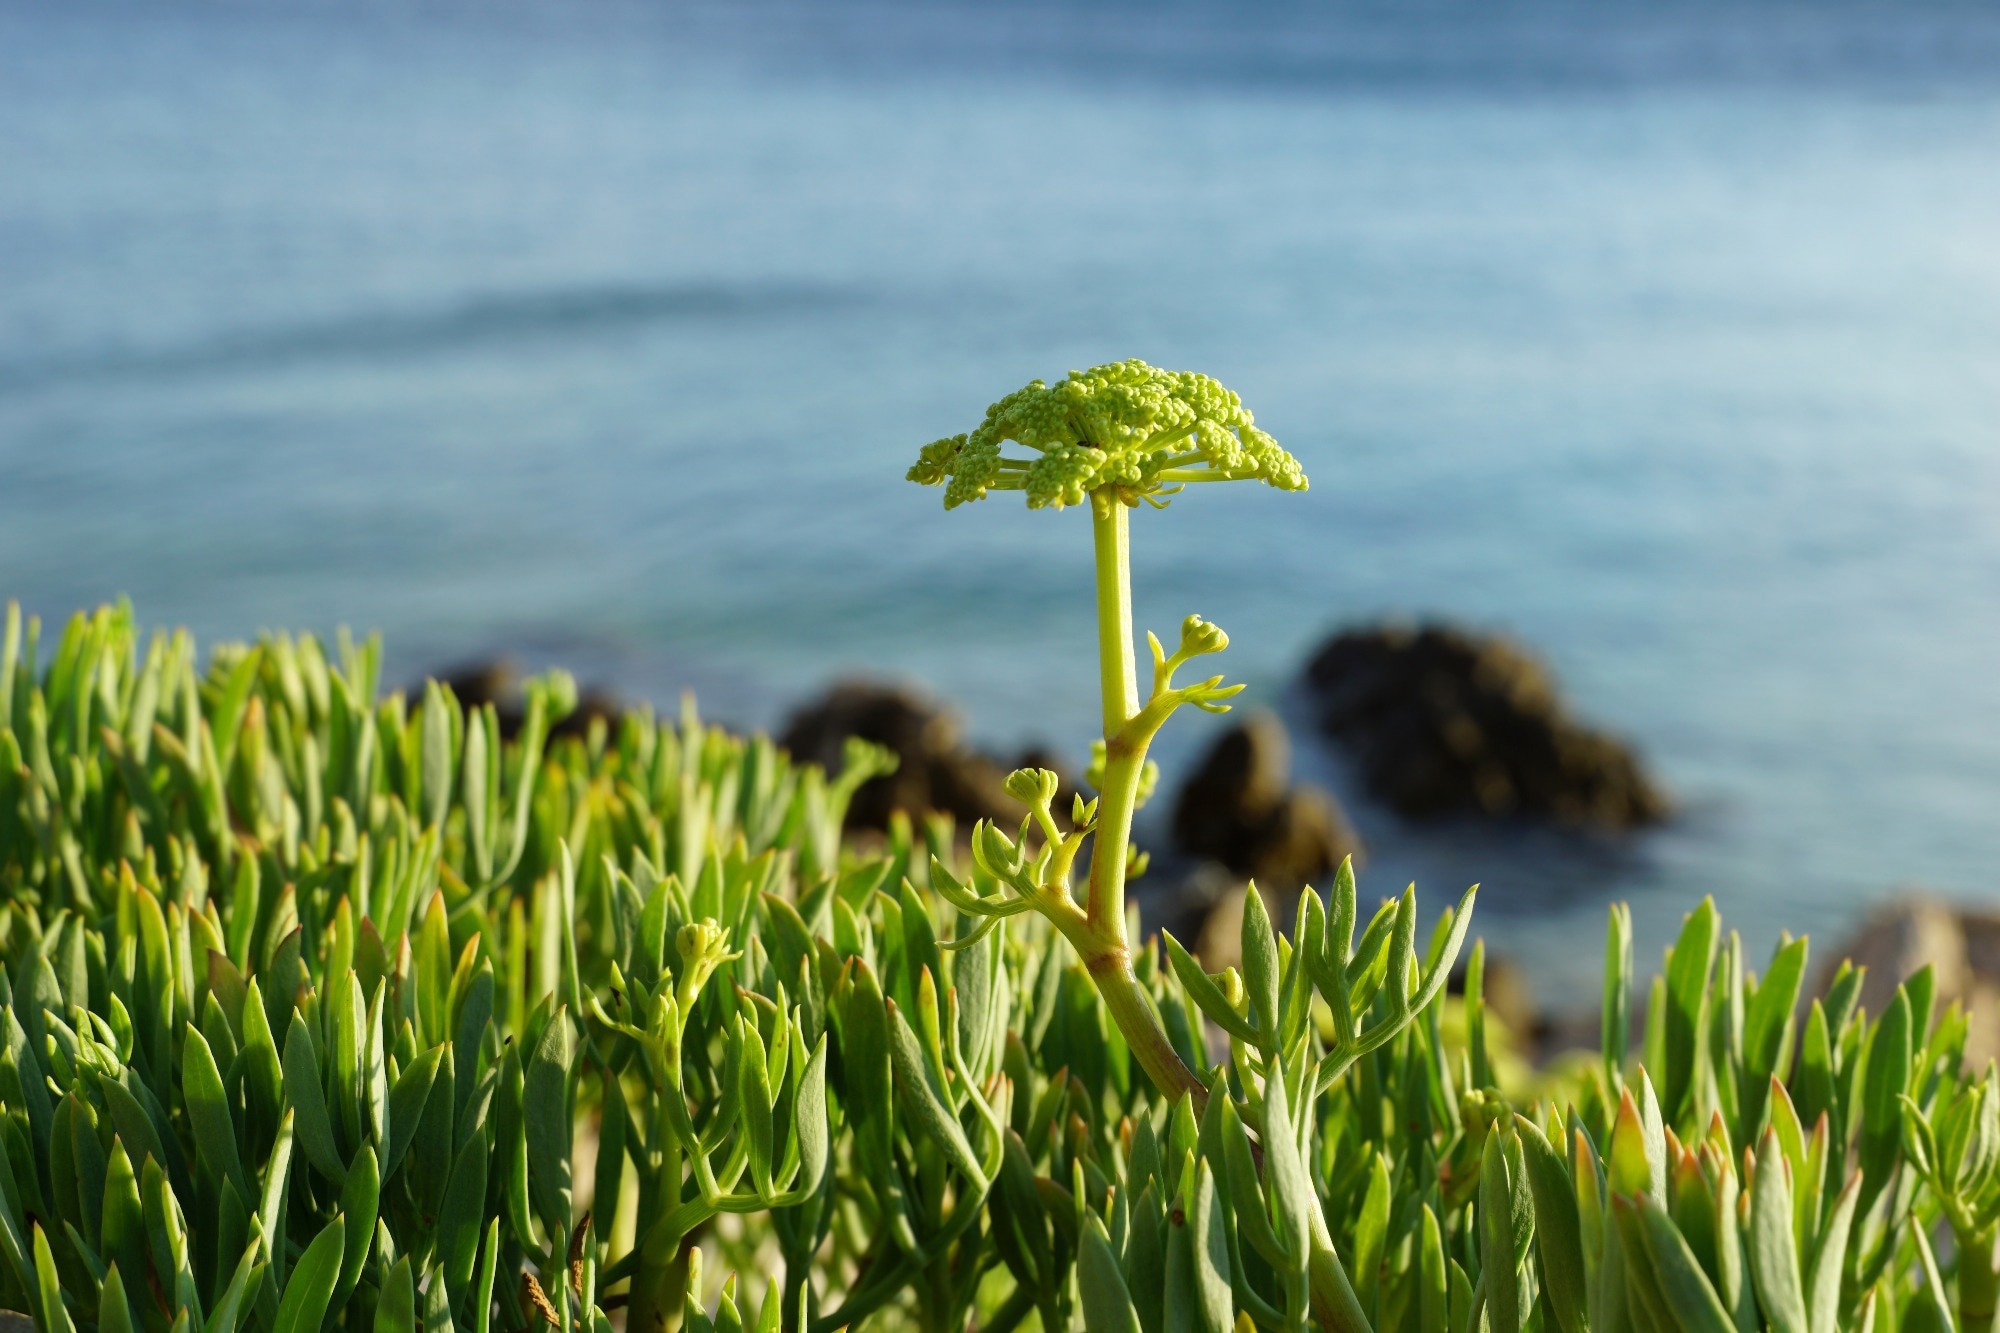 Study: Volatiles from French and Croatian Sea Fennel Ecotypes: Chemical Profiles and the Antioxidant, Antimicrobial and Antiageing Activity of Essential Oils and Hydrolates. Image Credit: Happy window / Shutterstock